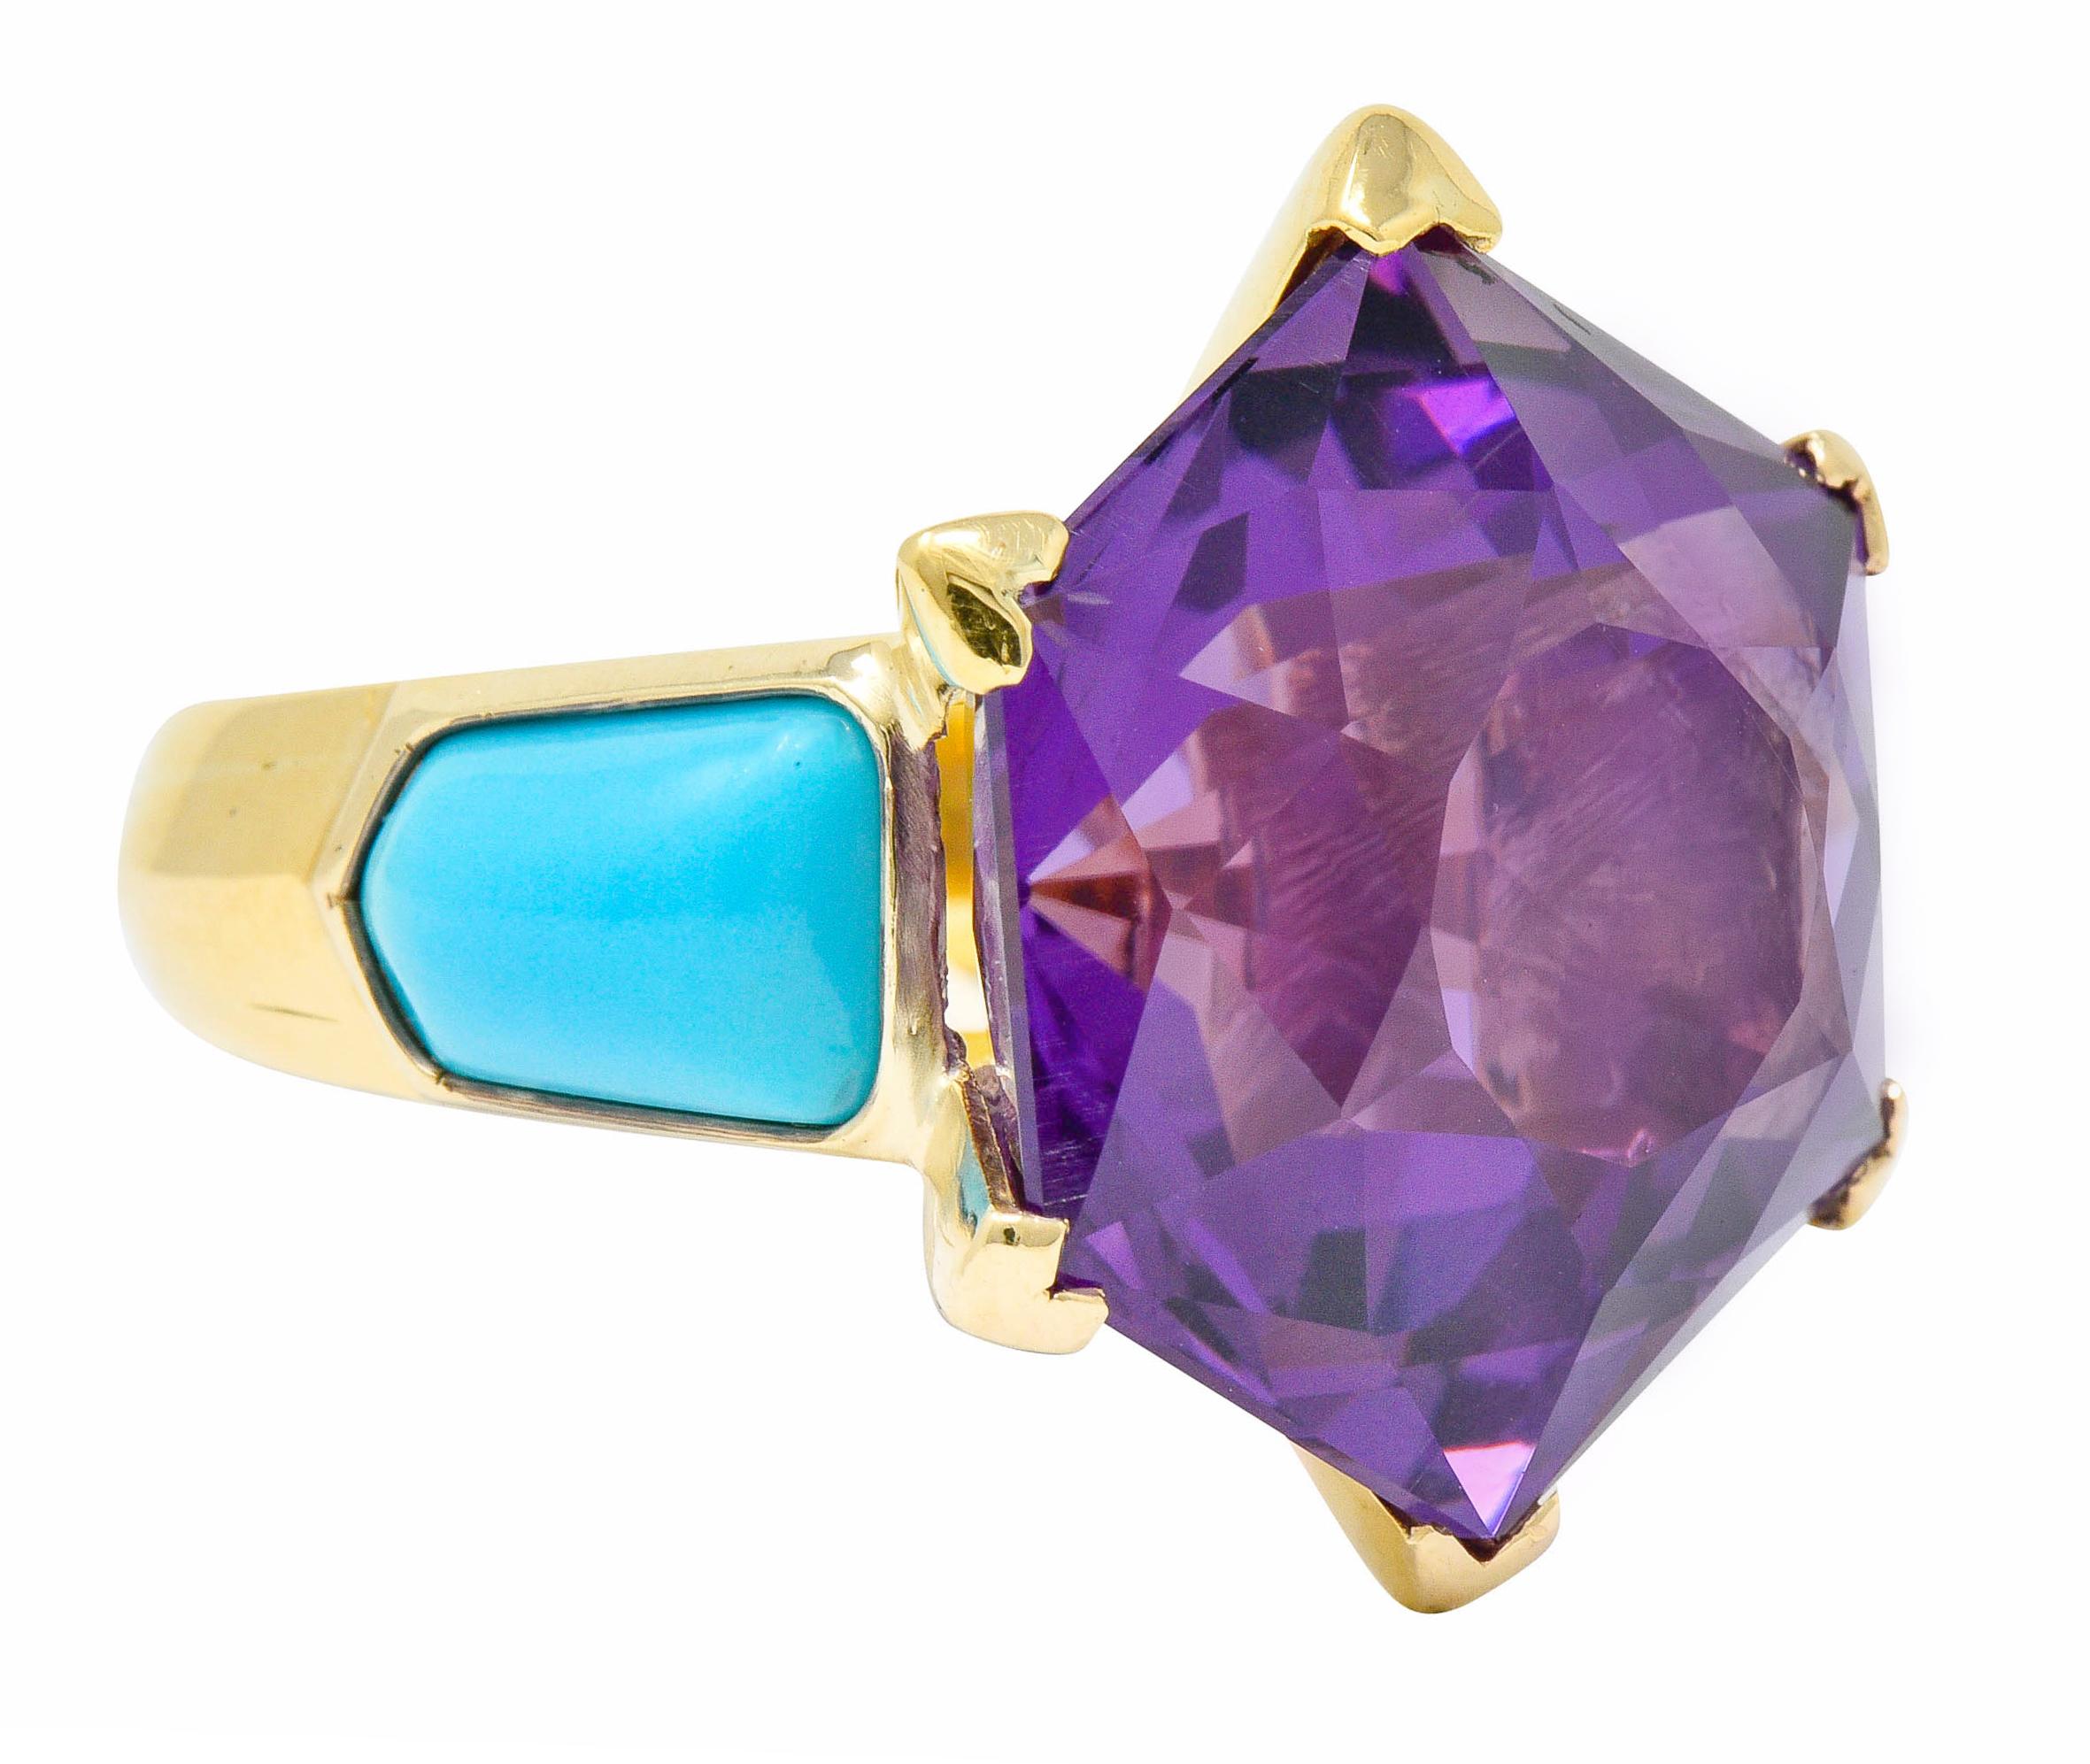 Statement ring centers a large hexagonal cut amethyst measuring approximately 22.0 x 22.0 mm

Transparent and vibrantly purple and even in color

Set as a starburst motif with dynamic V prongs that extend down to mounting

Flanked by calibrè cut